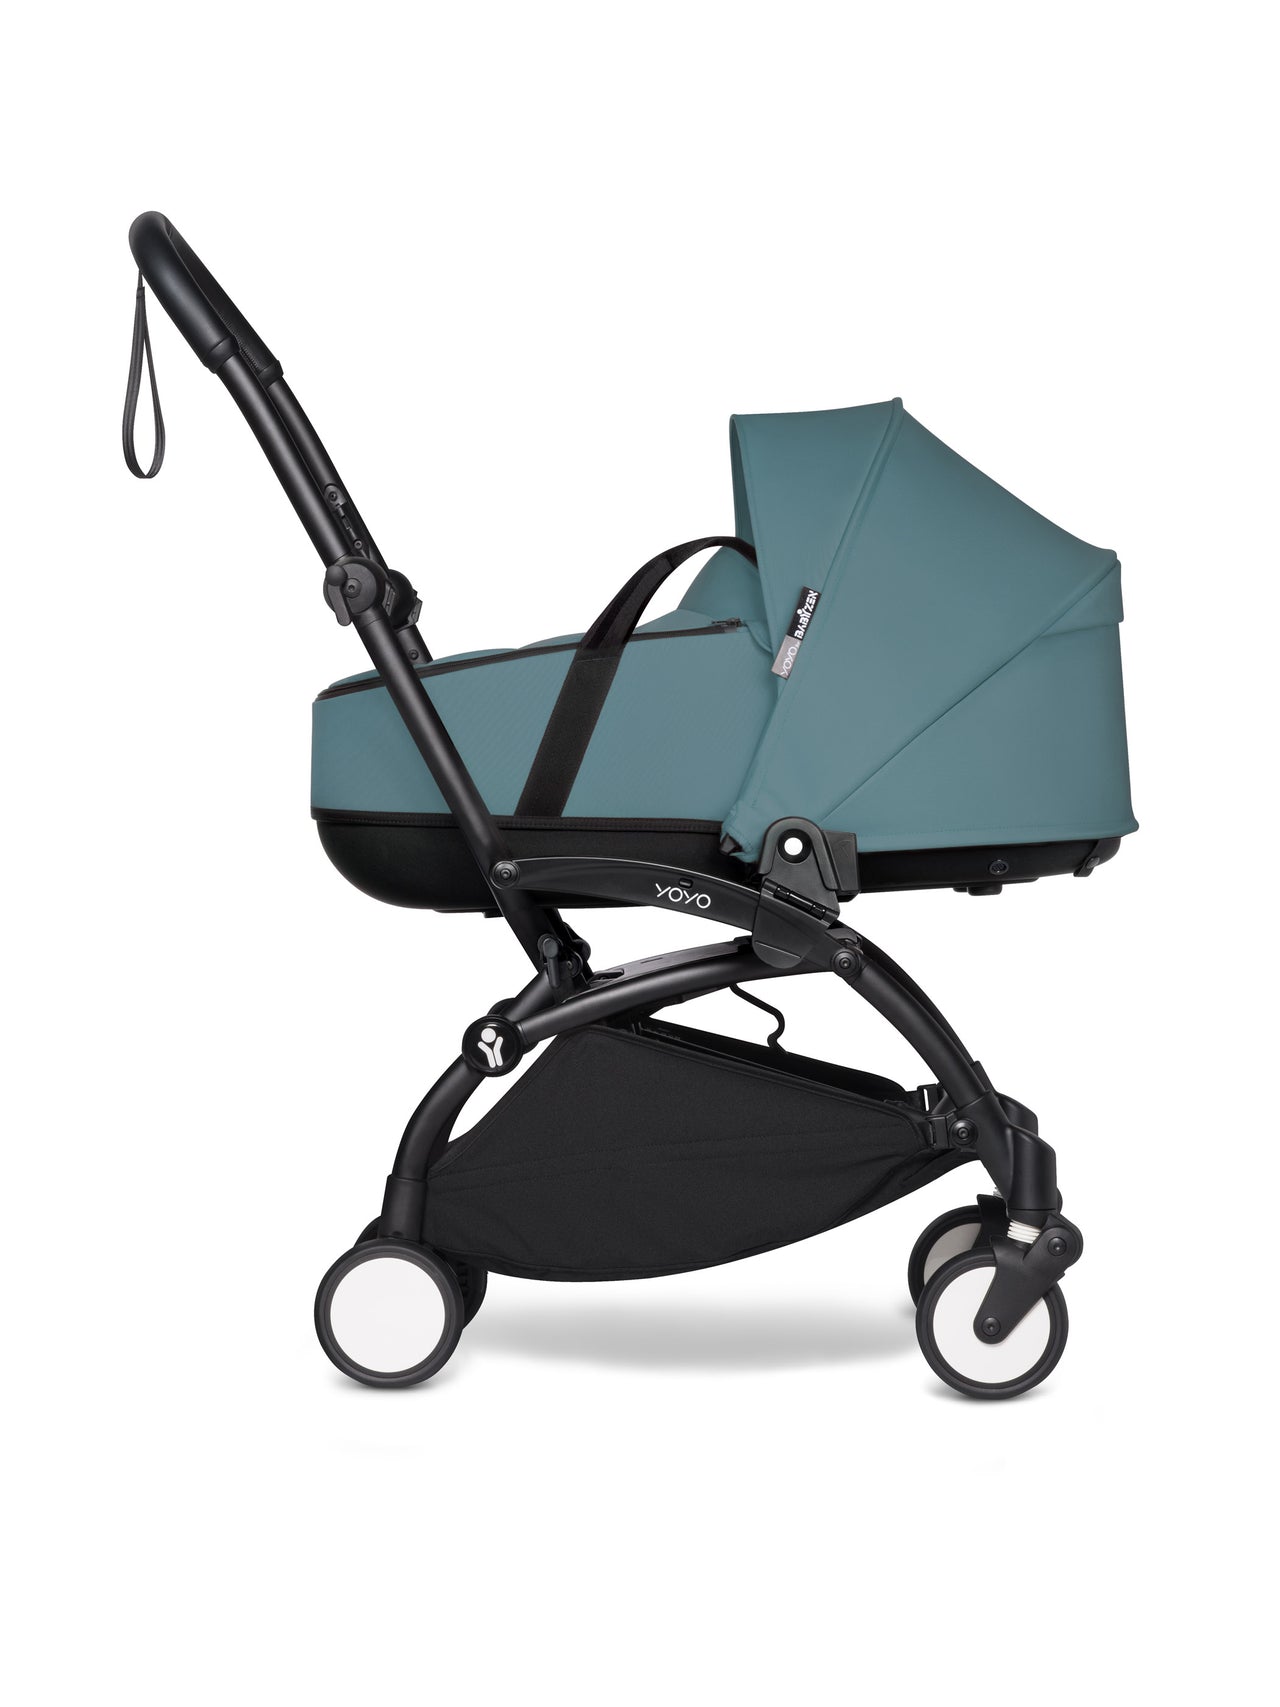 BABYZEN YOYO² (Black Frame) Complete with Bassinet  - Aqua with FREE BACKPACK